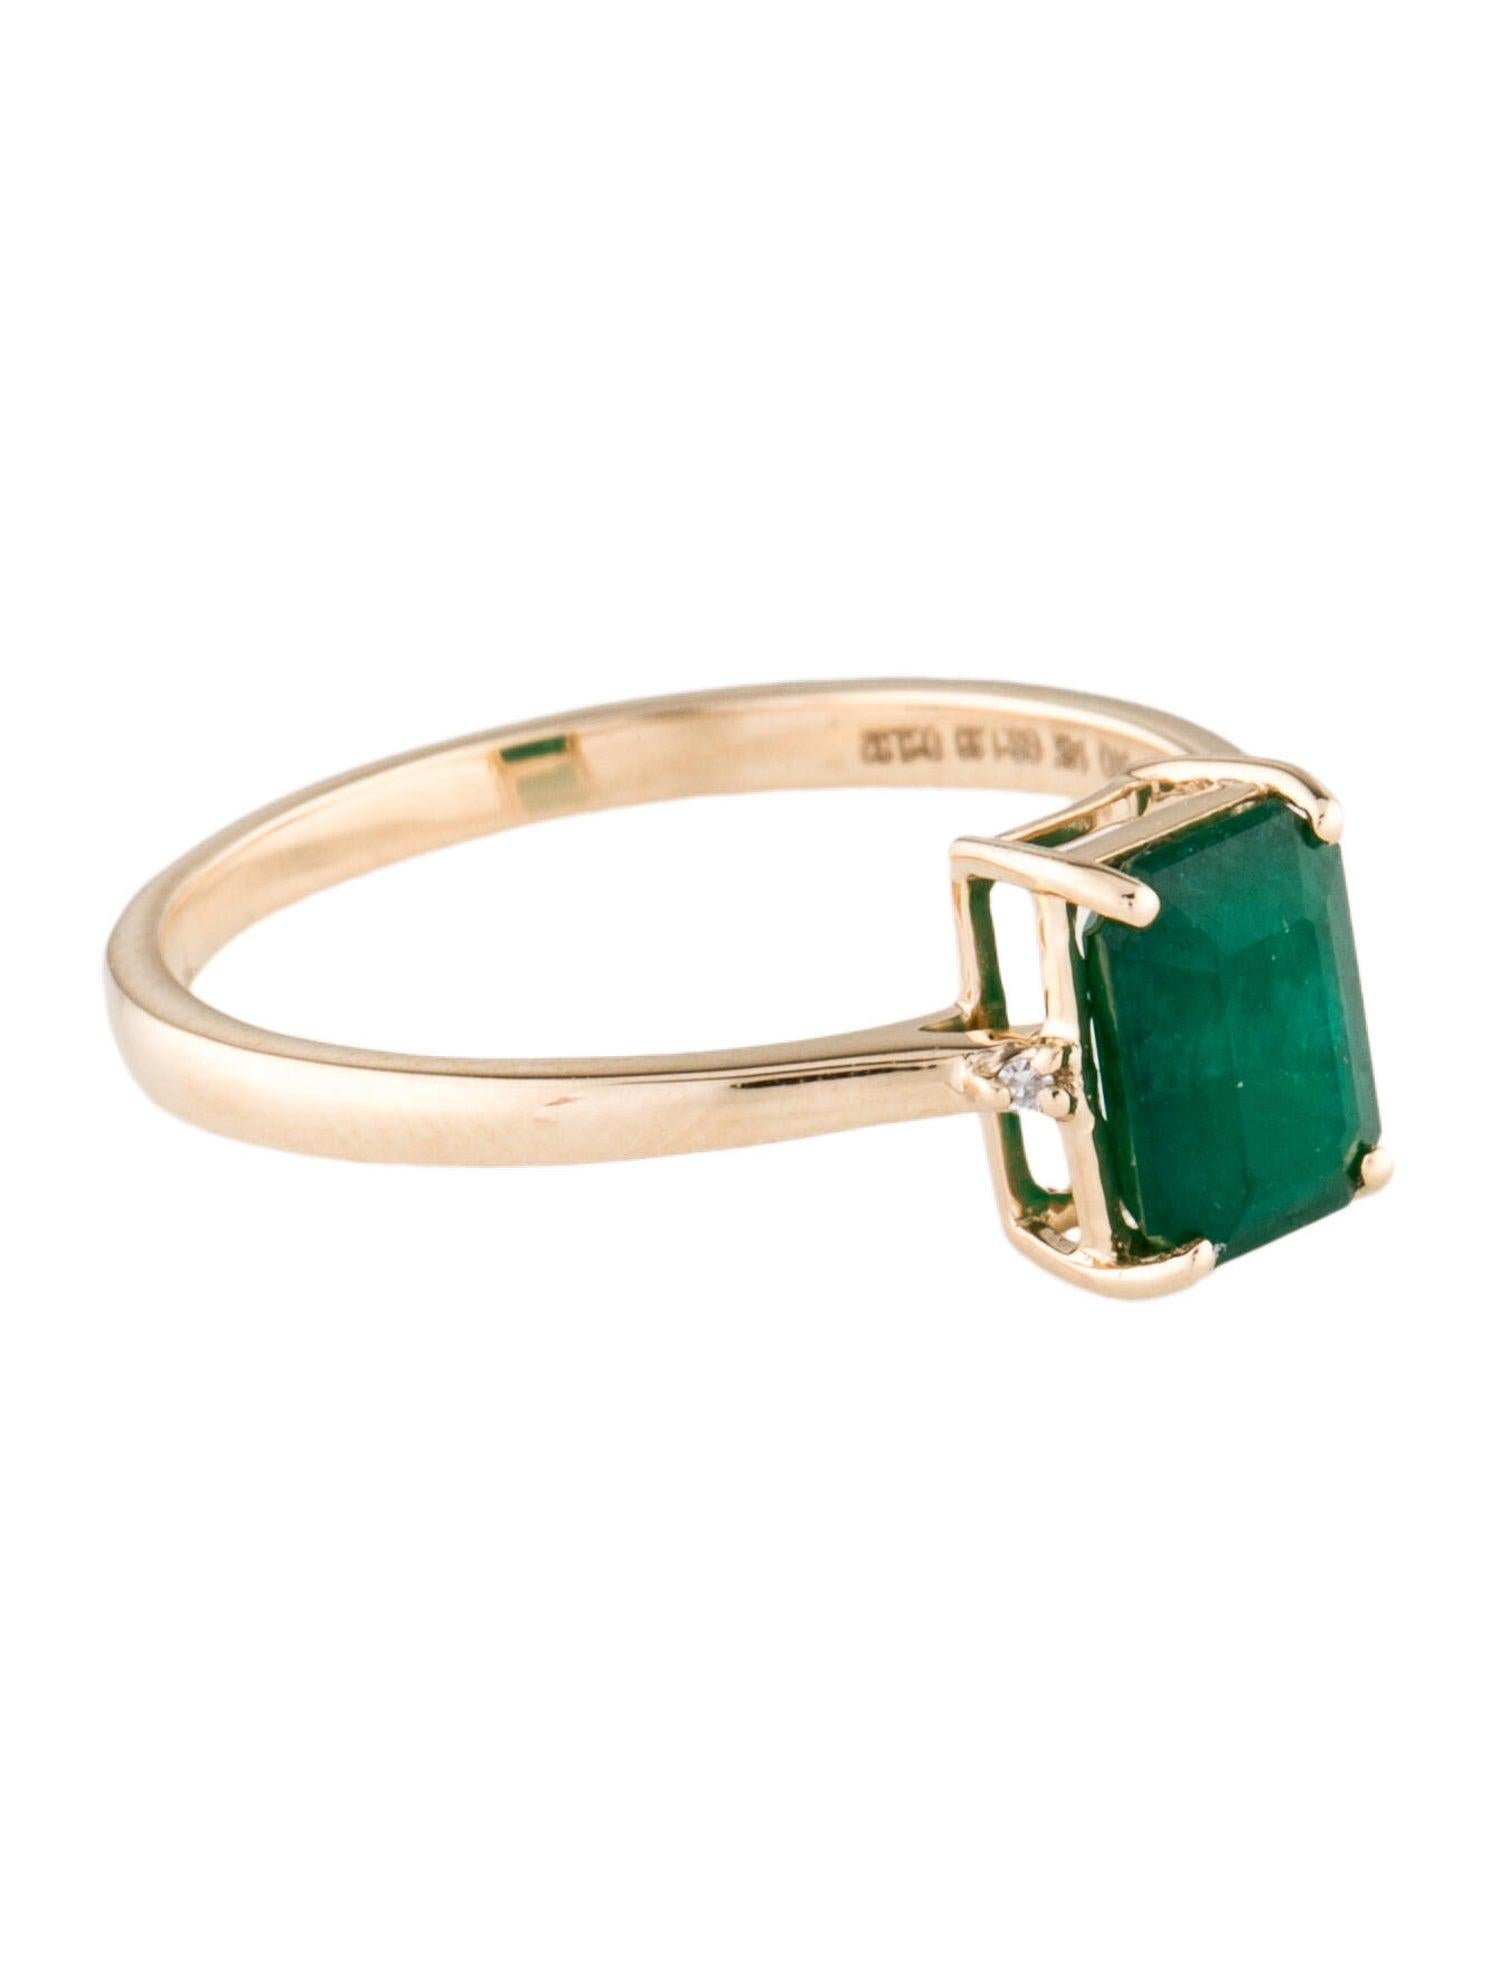 Discover the timeless elegance of our 14K Yellow Gold Cocktail Ring, featuring a magnificent 0.86 carat Emerald Cut Emerald, complemented by two near colorless, single-cut diamonds. This exquisite piece is a testament to refined craftsmanship and